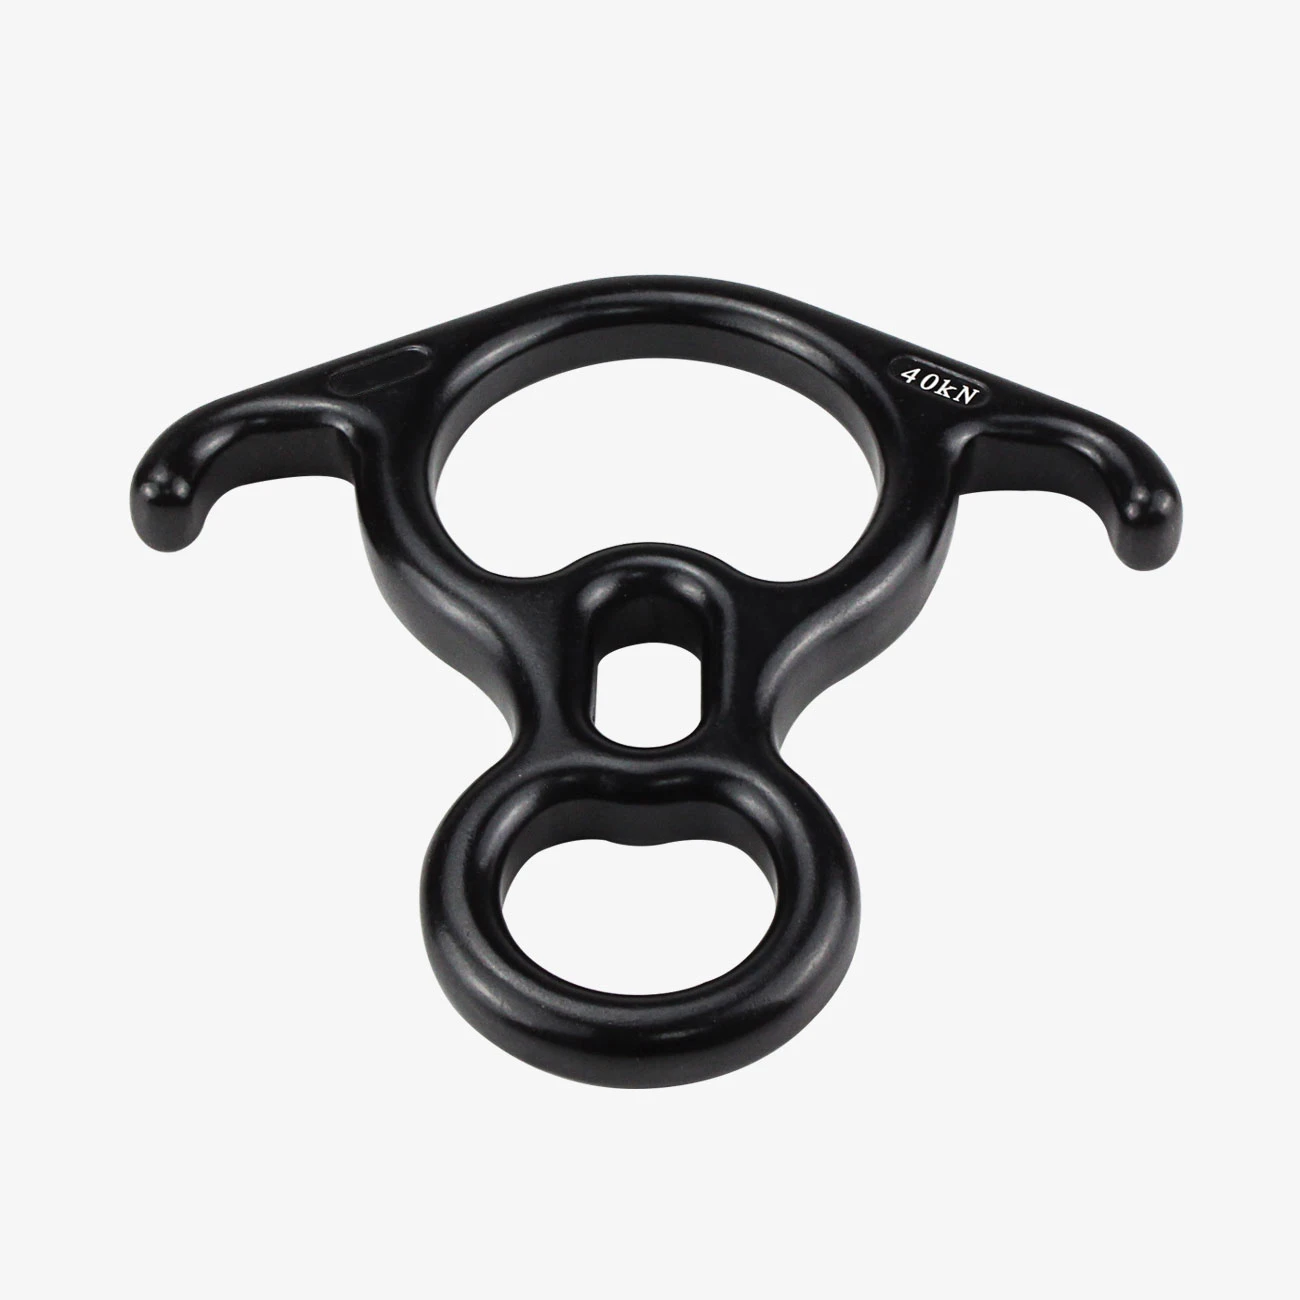 High strength and good price Rock clmbing safety rescue rappeling figure 8 ring rope descender